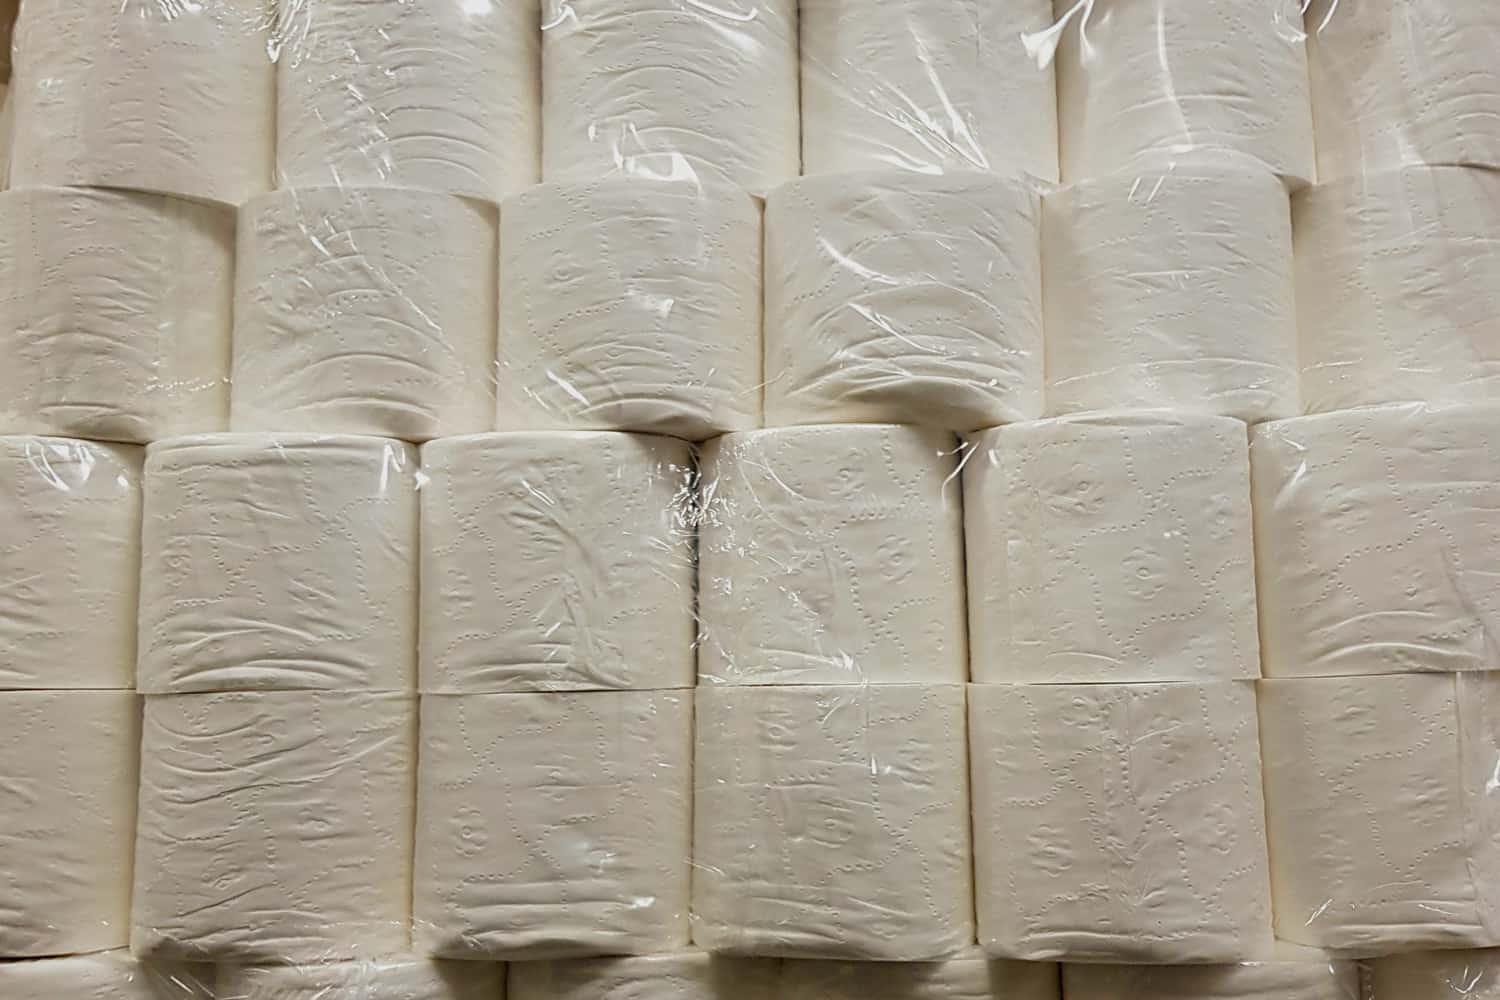 Layers of toilet paper in the storage